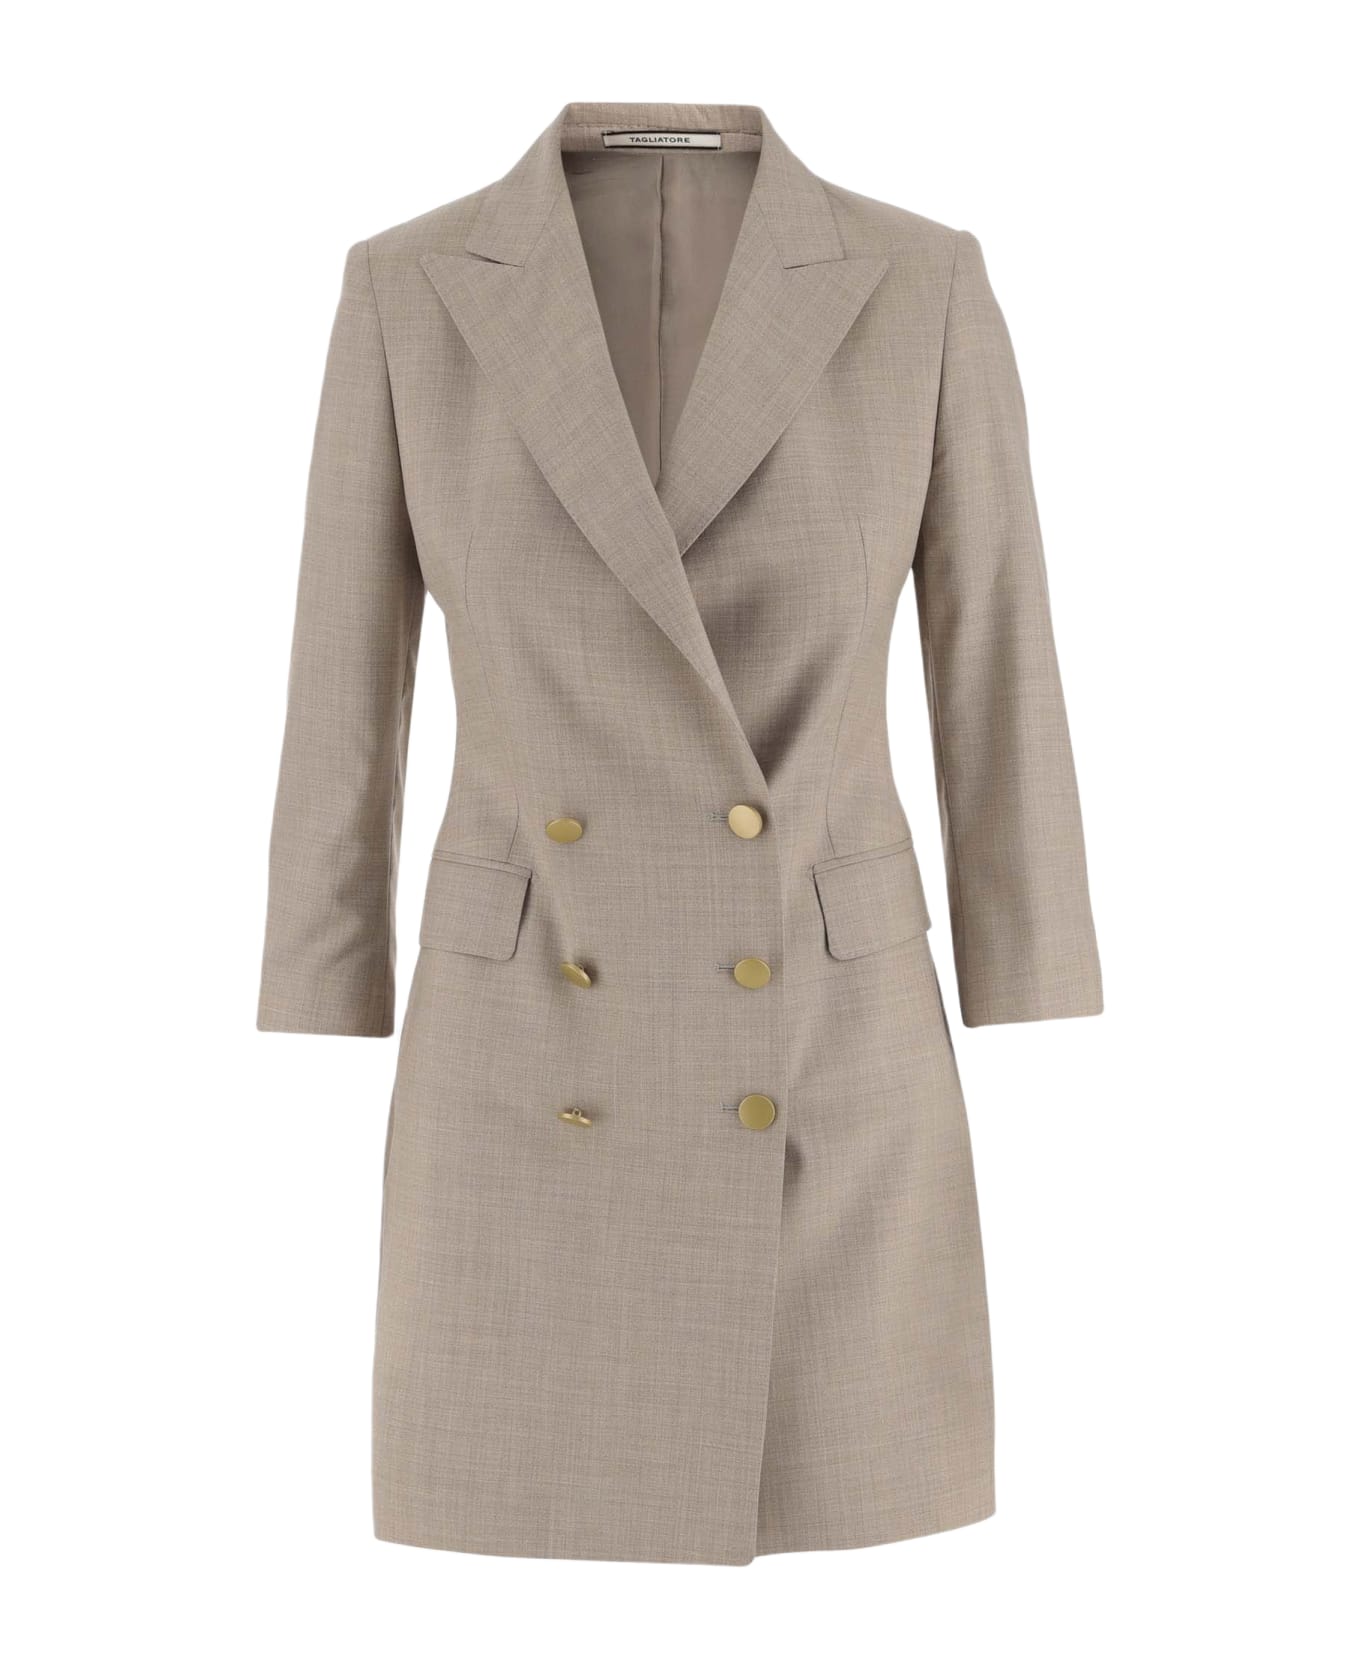 Tagliatore Wool And Silk Double-breasted Jacket - Beige レインコート